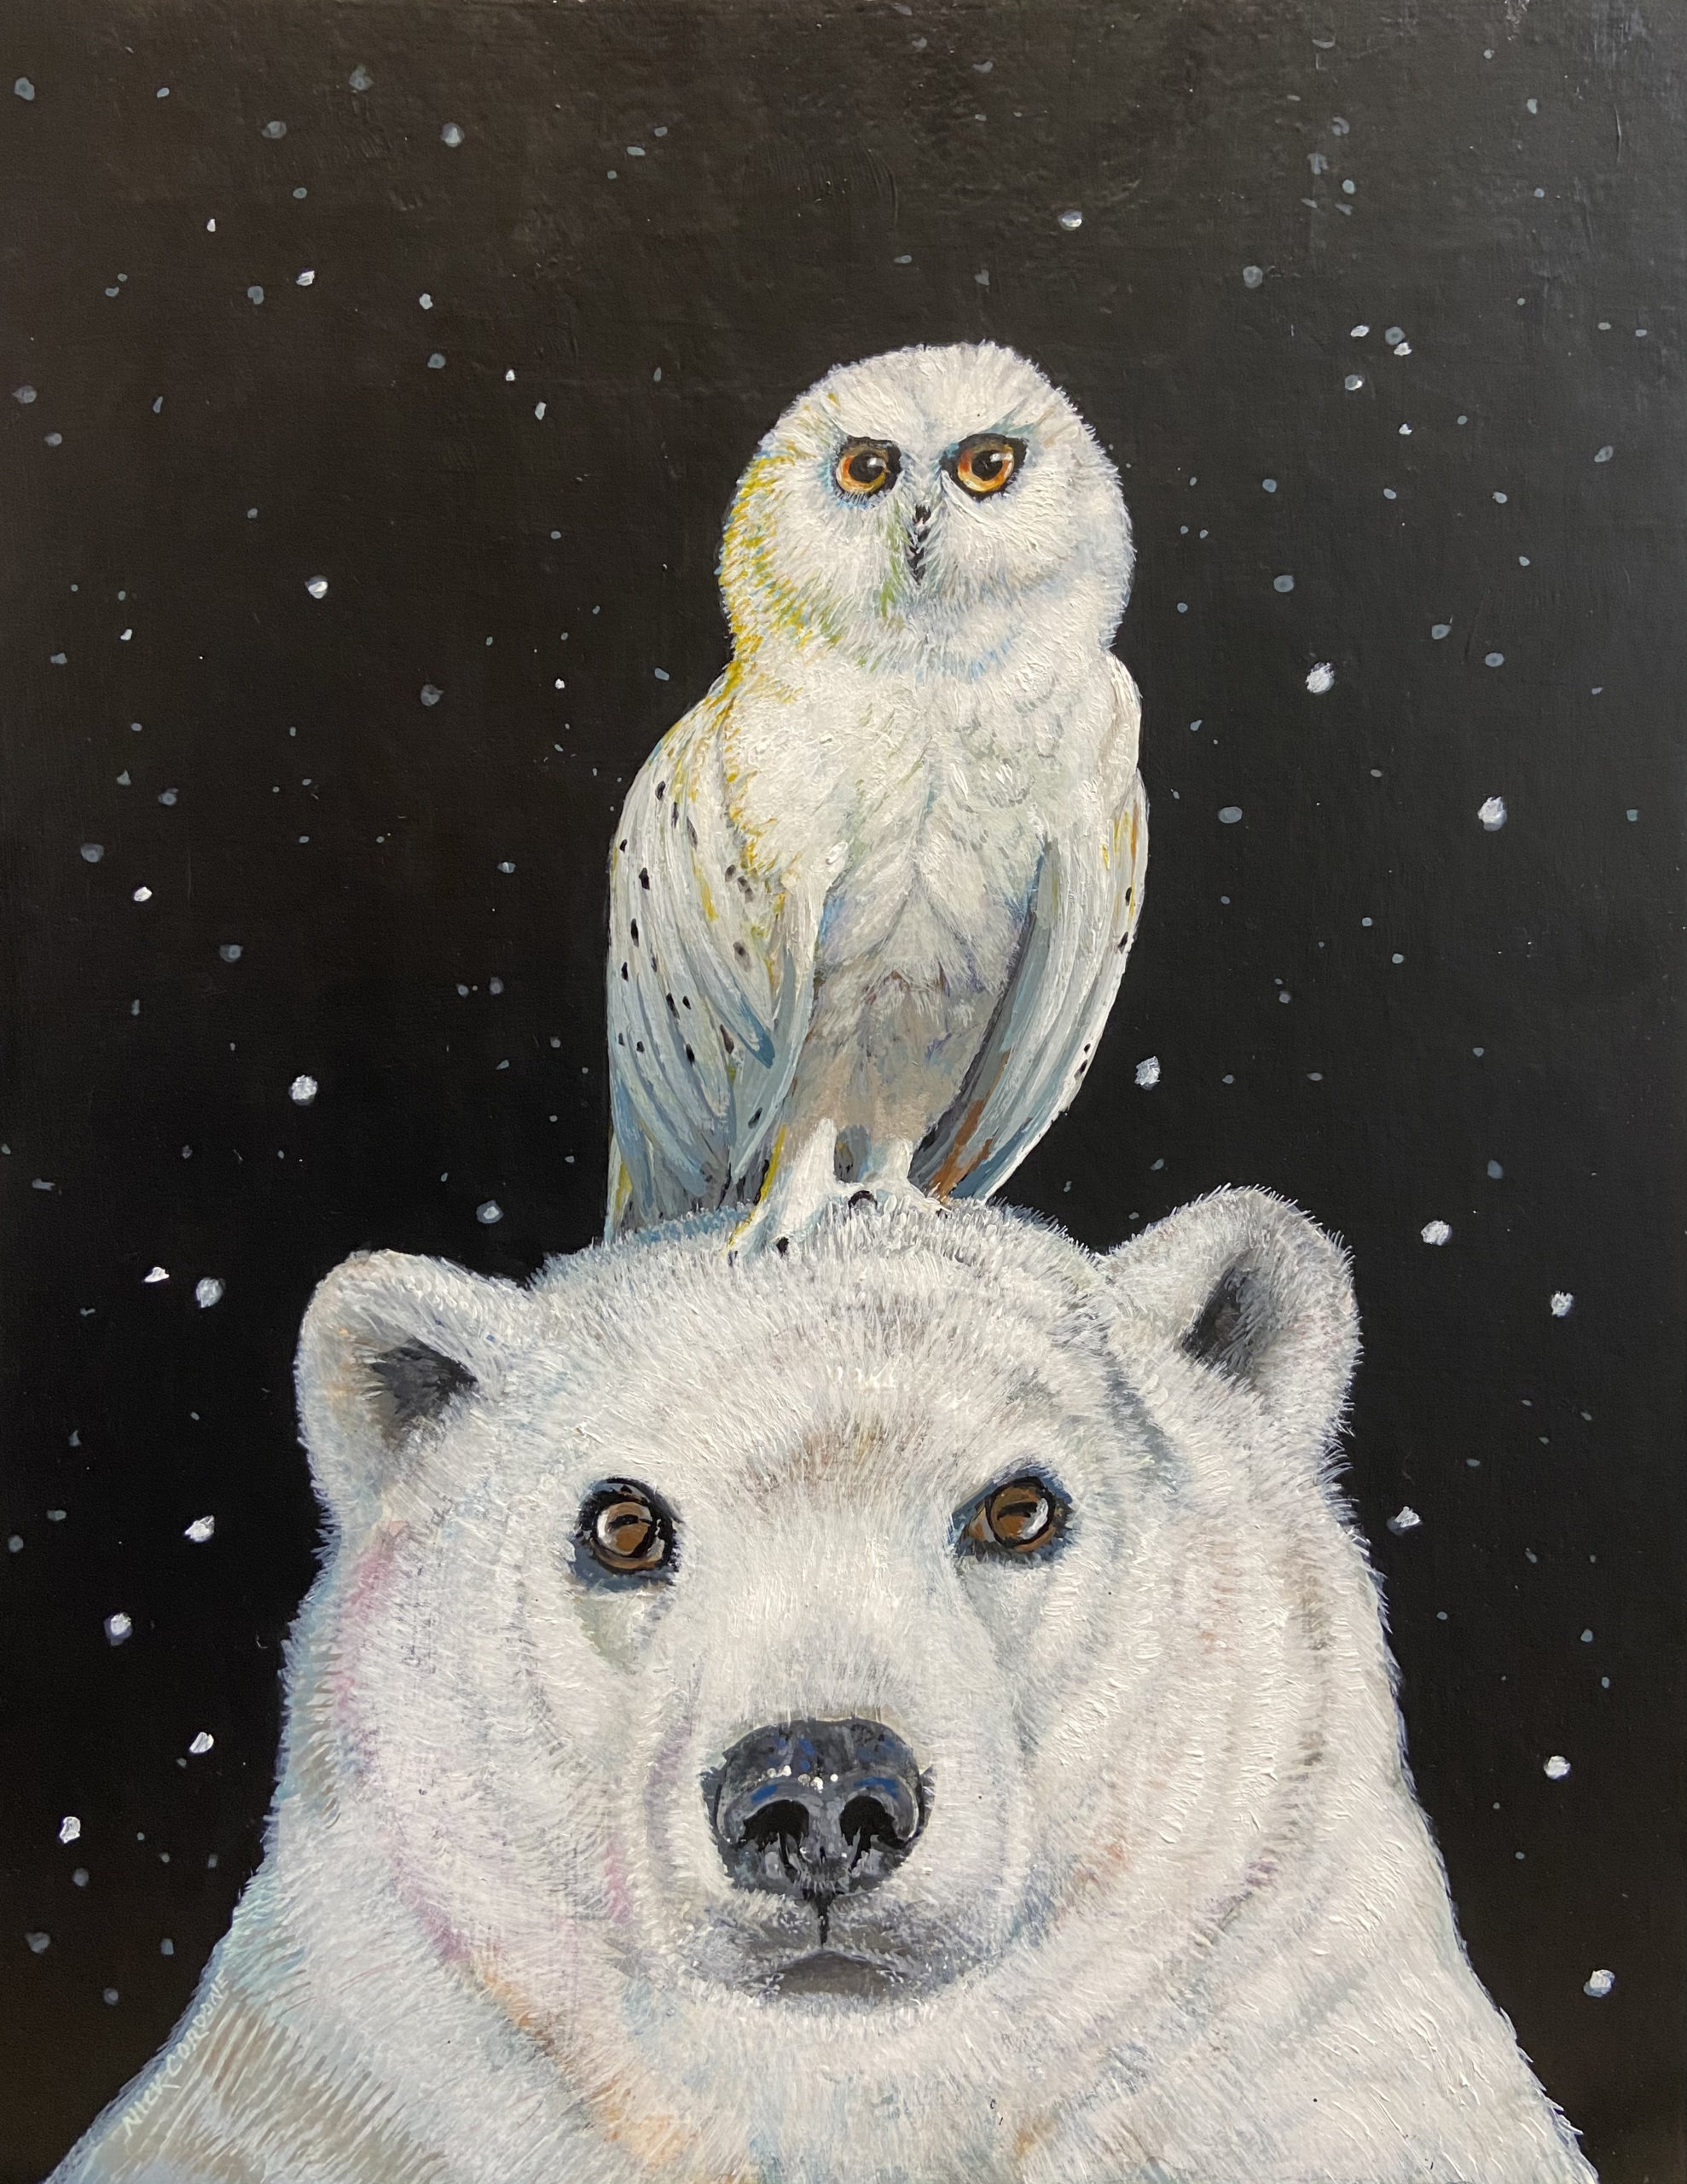 Nick Cordone's “Snowy sisters” (Do animals discuss the effects of climate change?)